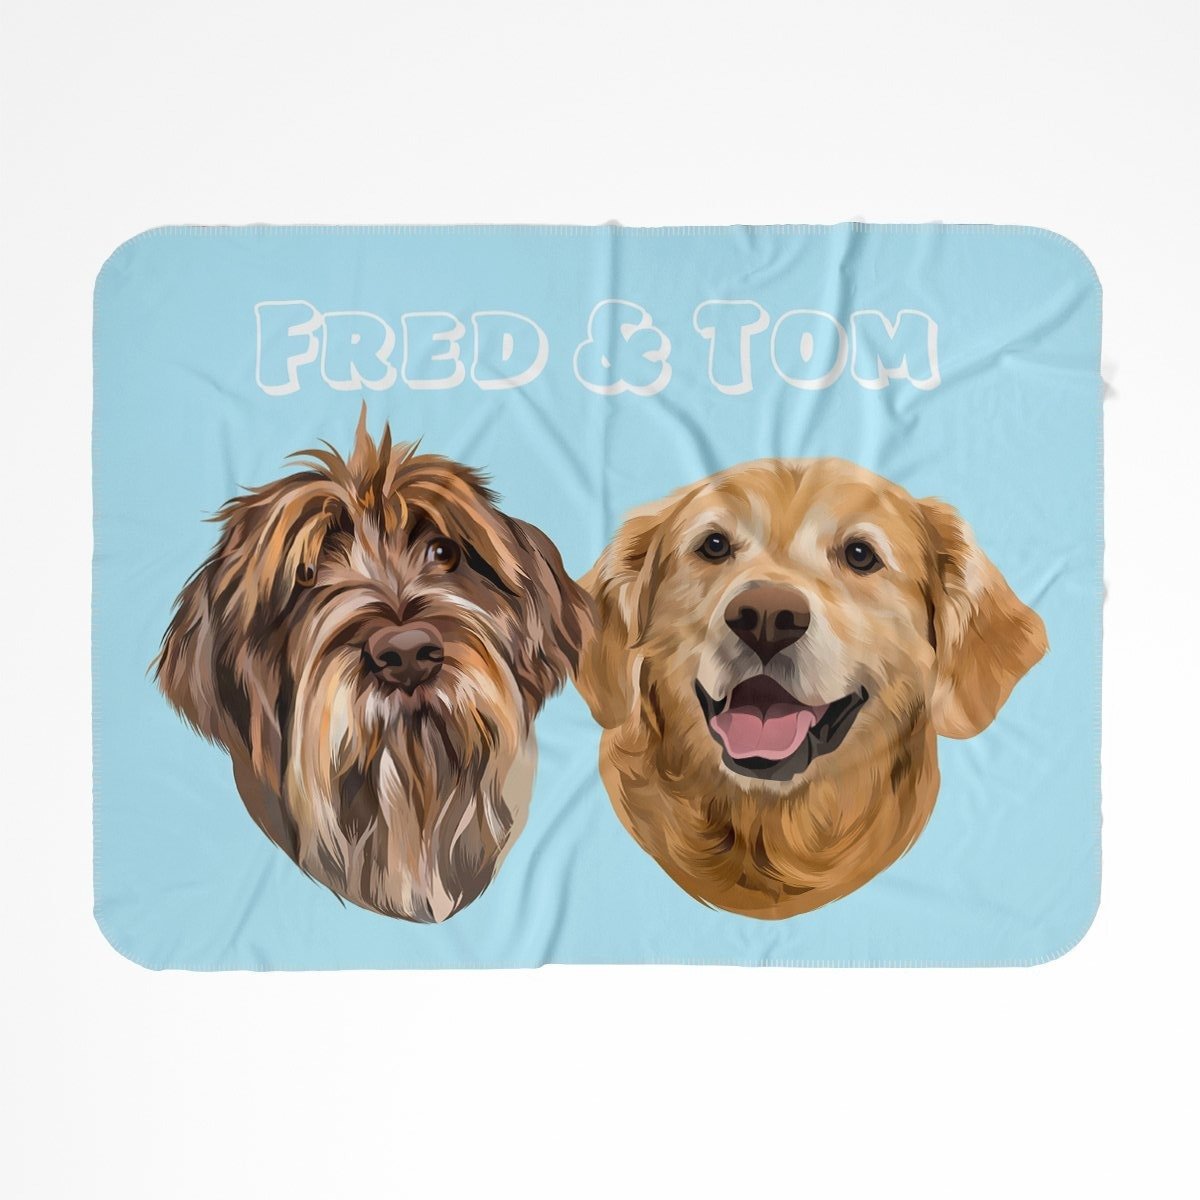 Modern: Custom Two Pet Blanket - Paw & Glory - #pet portraits# - #dog portraits# - #pet portraits uk#Paw and glory, Pet portraits blanket,pet fleece blanket, super soft dog blanket, blanket of your dog, blankets with dog pictures on them, dog blanket cheap